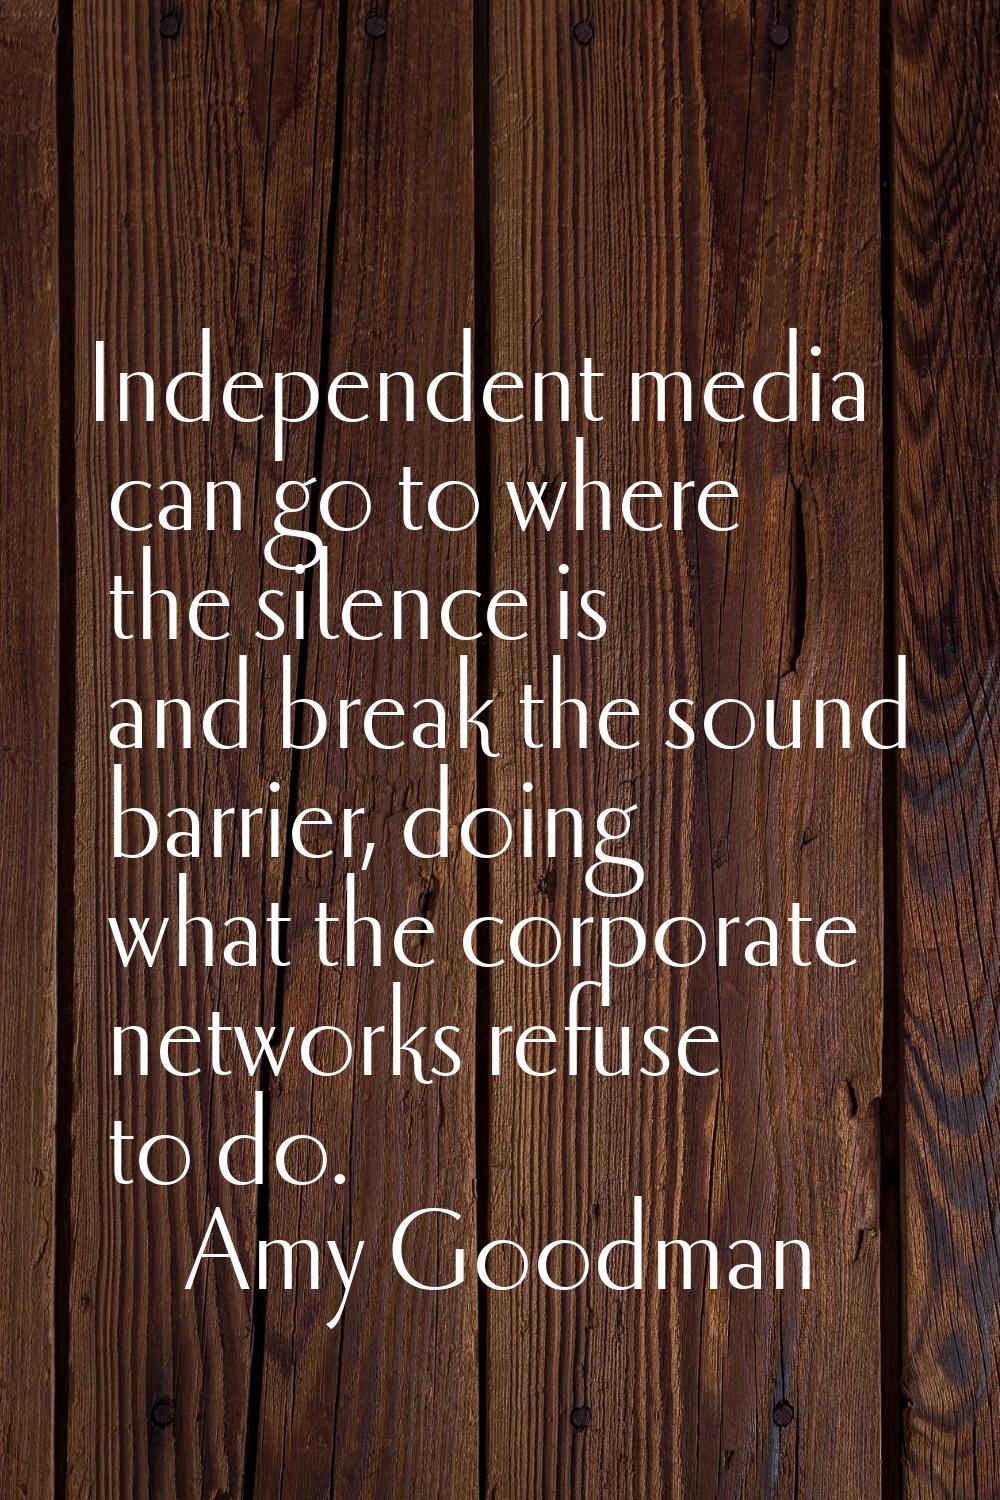 Independent media can go to where the silence is and break the sound barrier, doing what the corpor